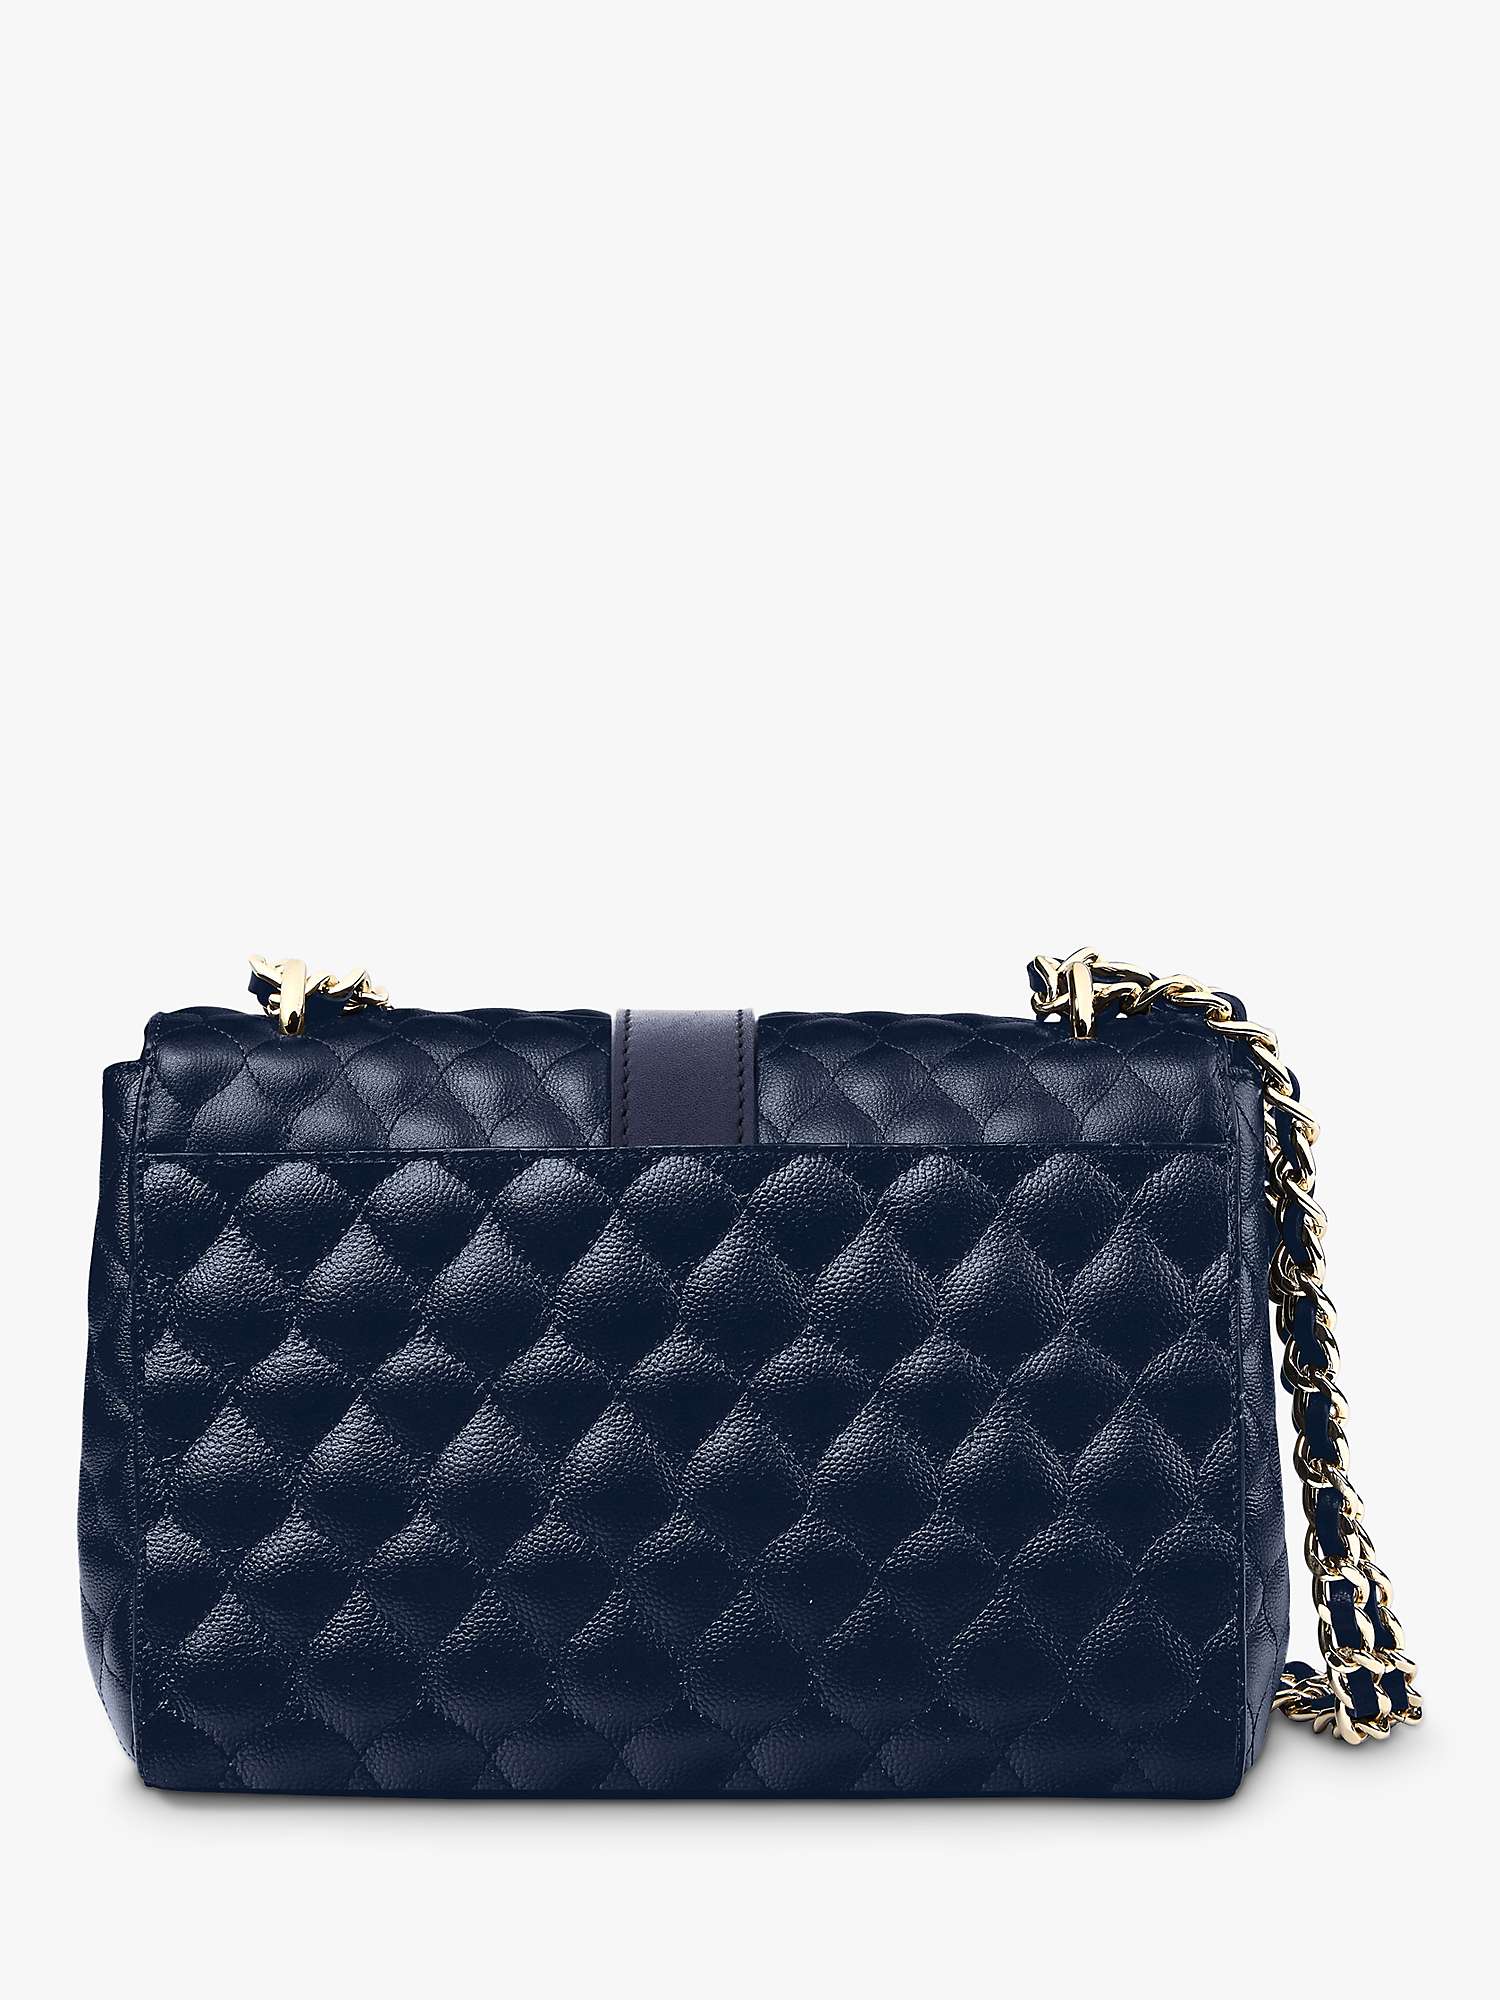 Buy Aspinal of London Lottie Small Quilted Pebble Leather Shoulder Bag Online at johnlewis.com